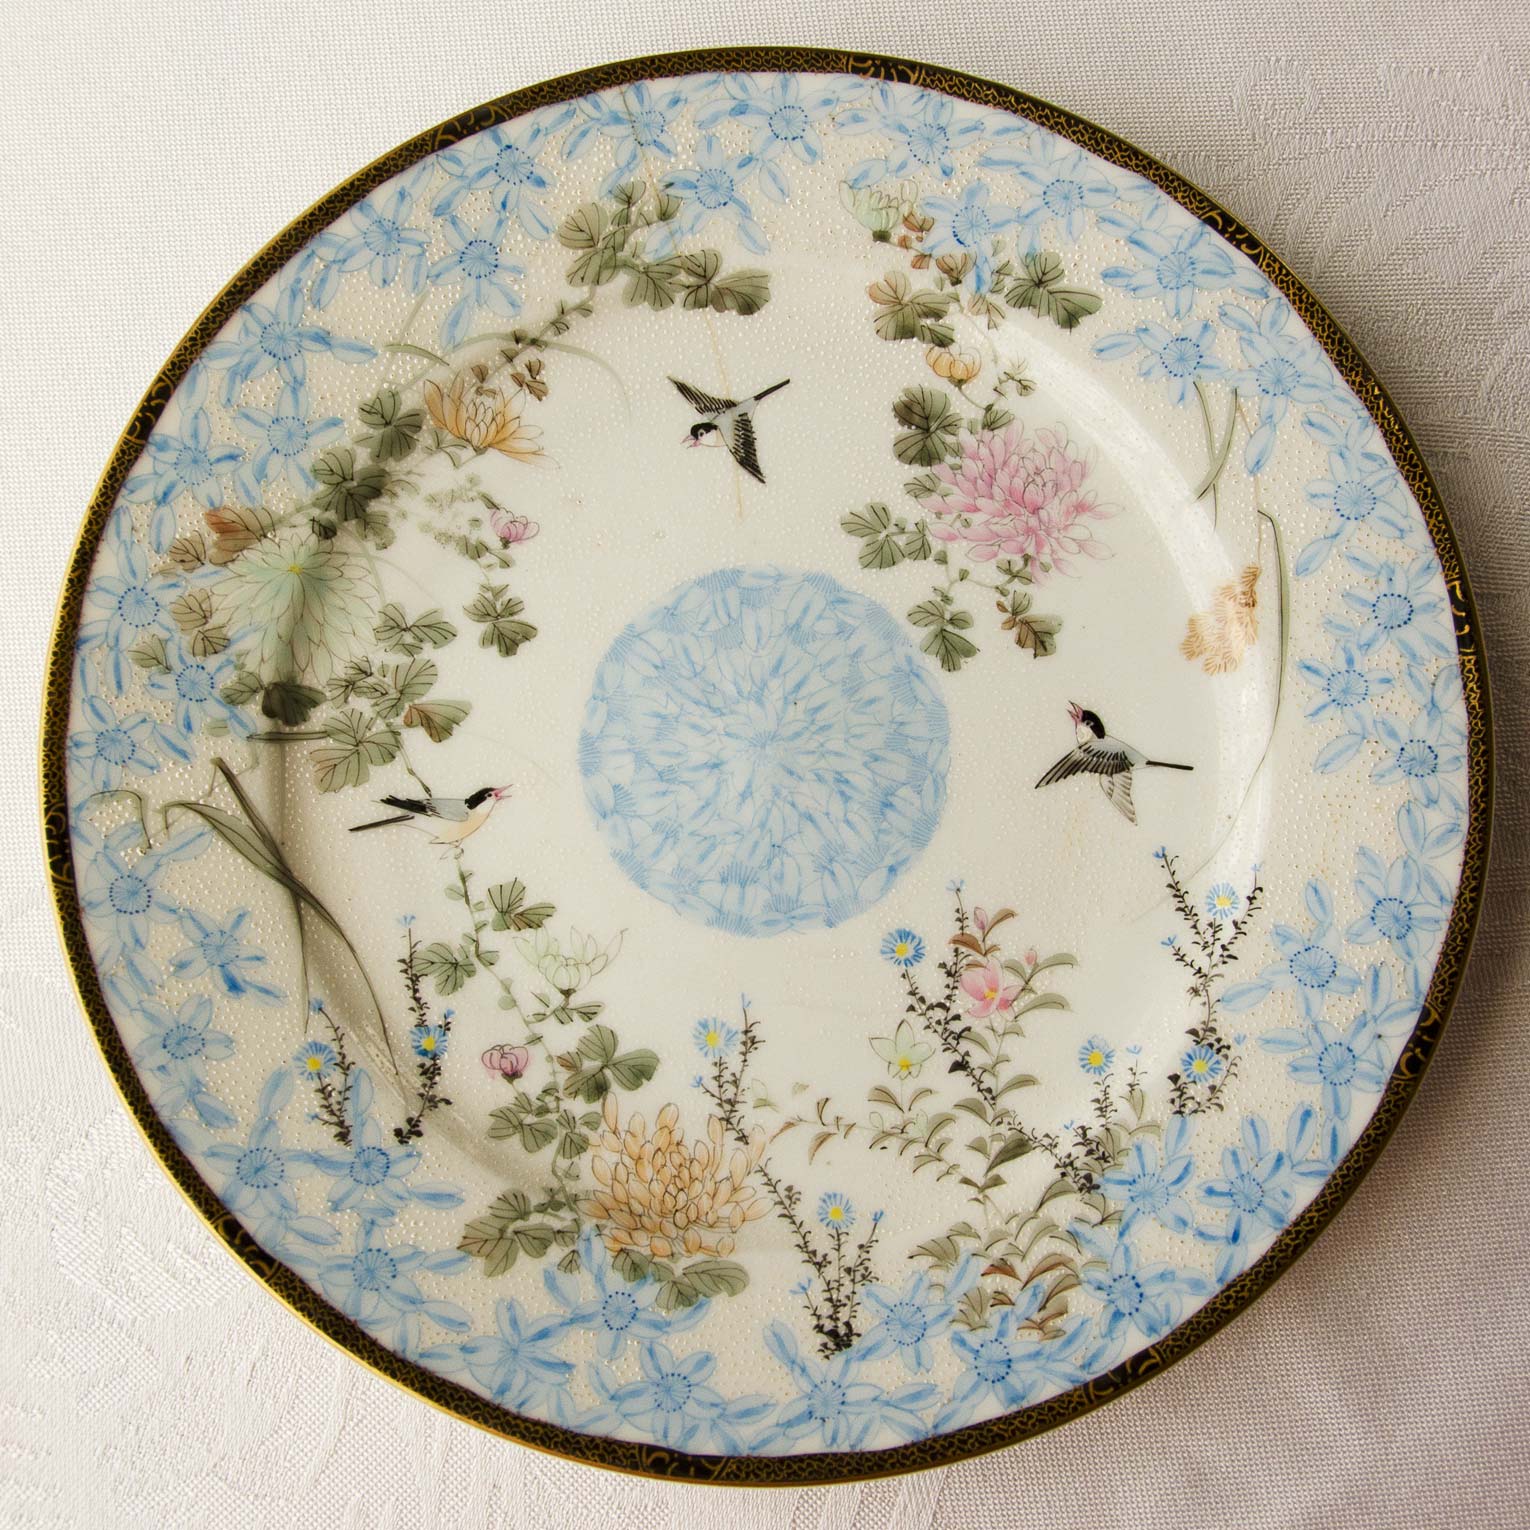 Hand painted porcelain plate china